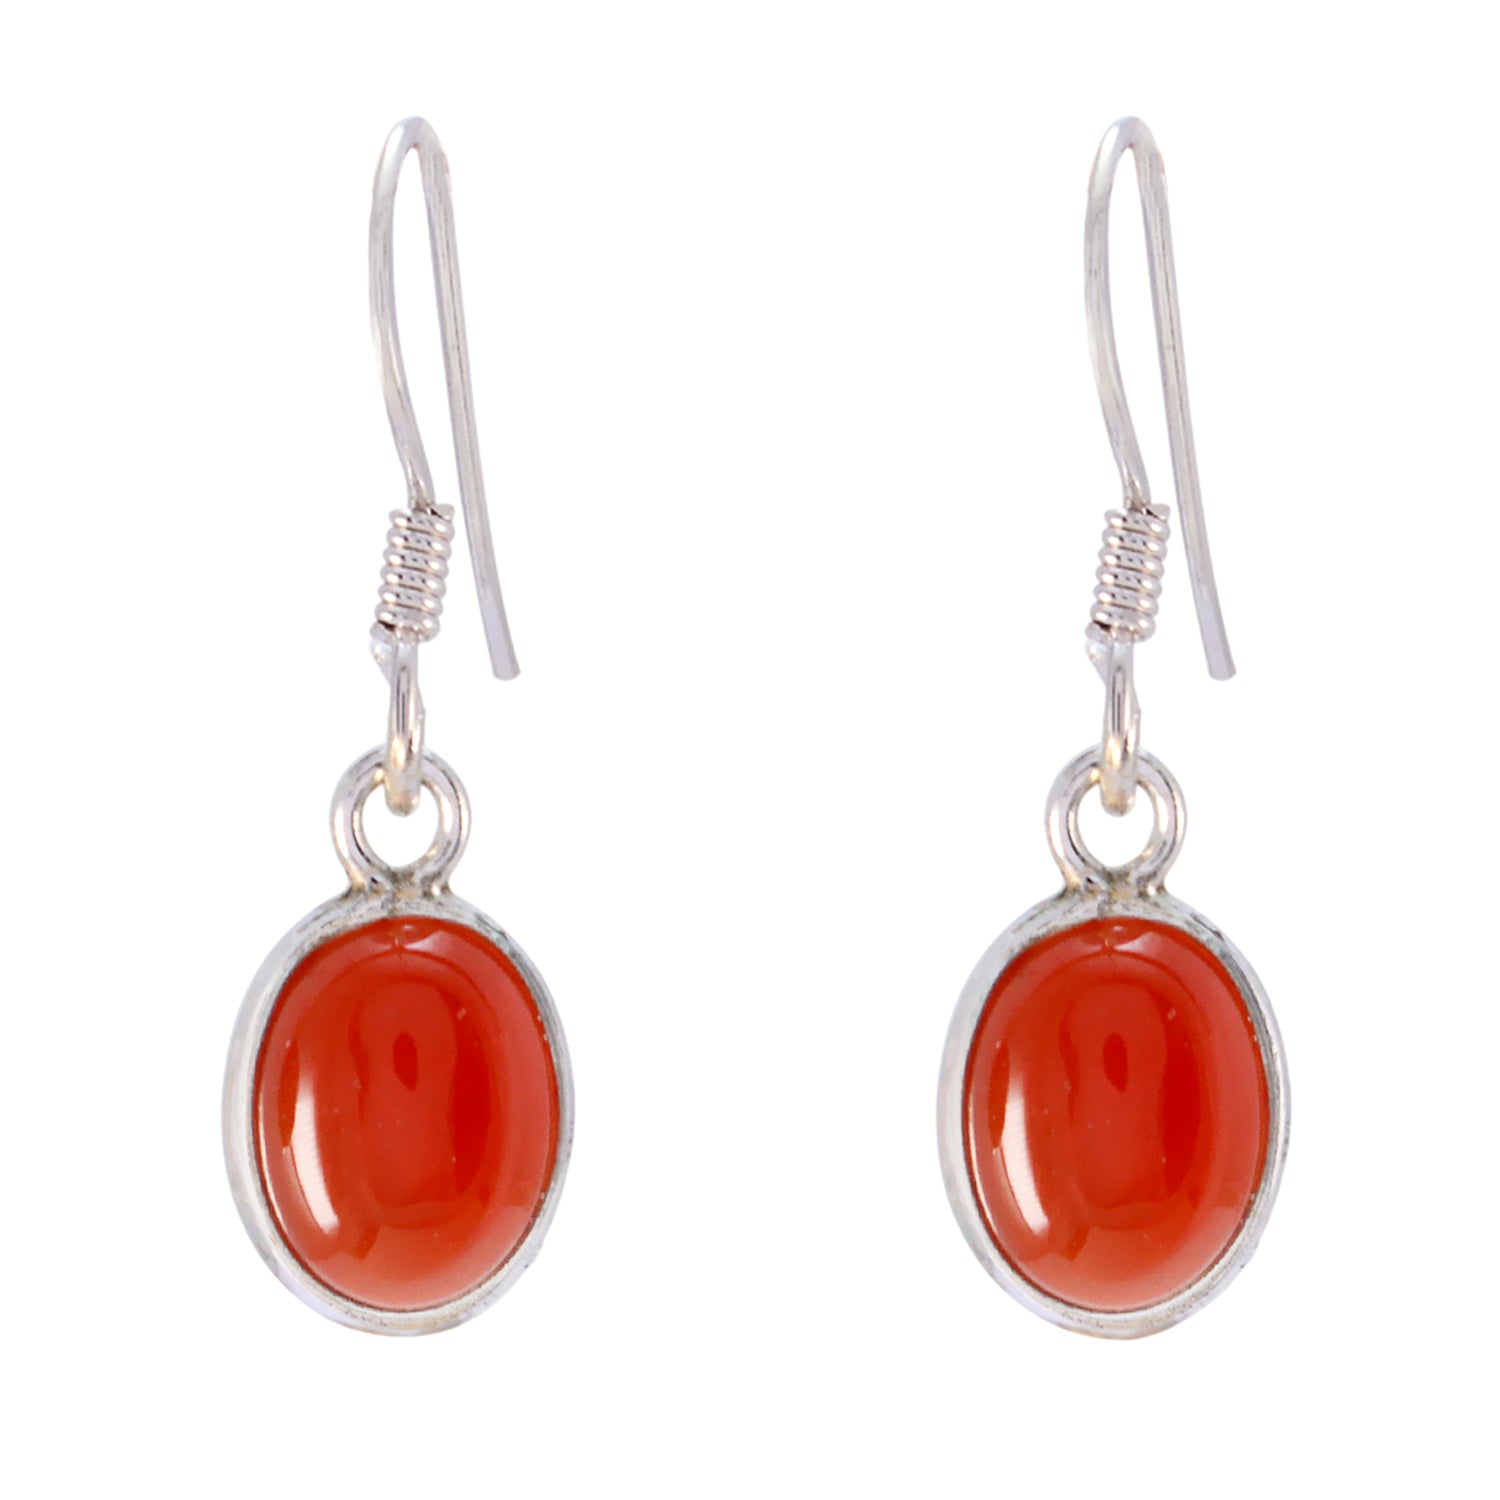 Riyo Natural Gemstone oval Cabochon Red Onyx Silver Earrings gift for cyber Monday